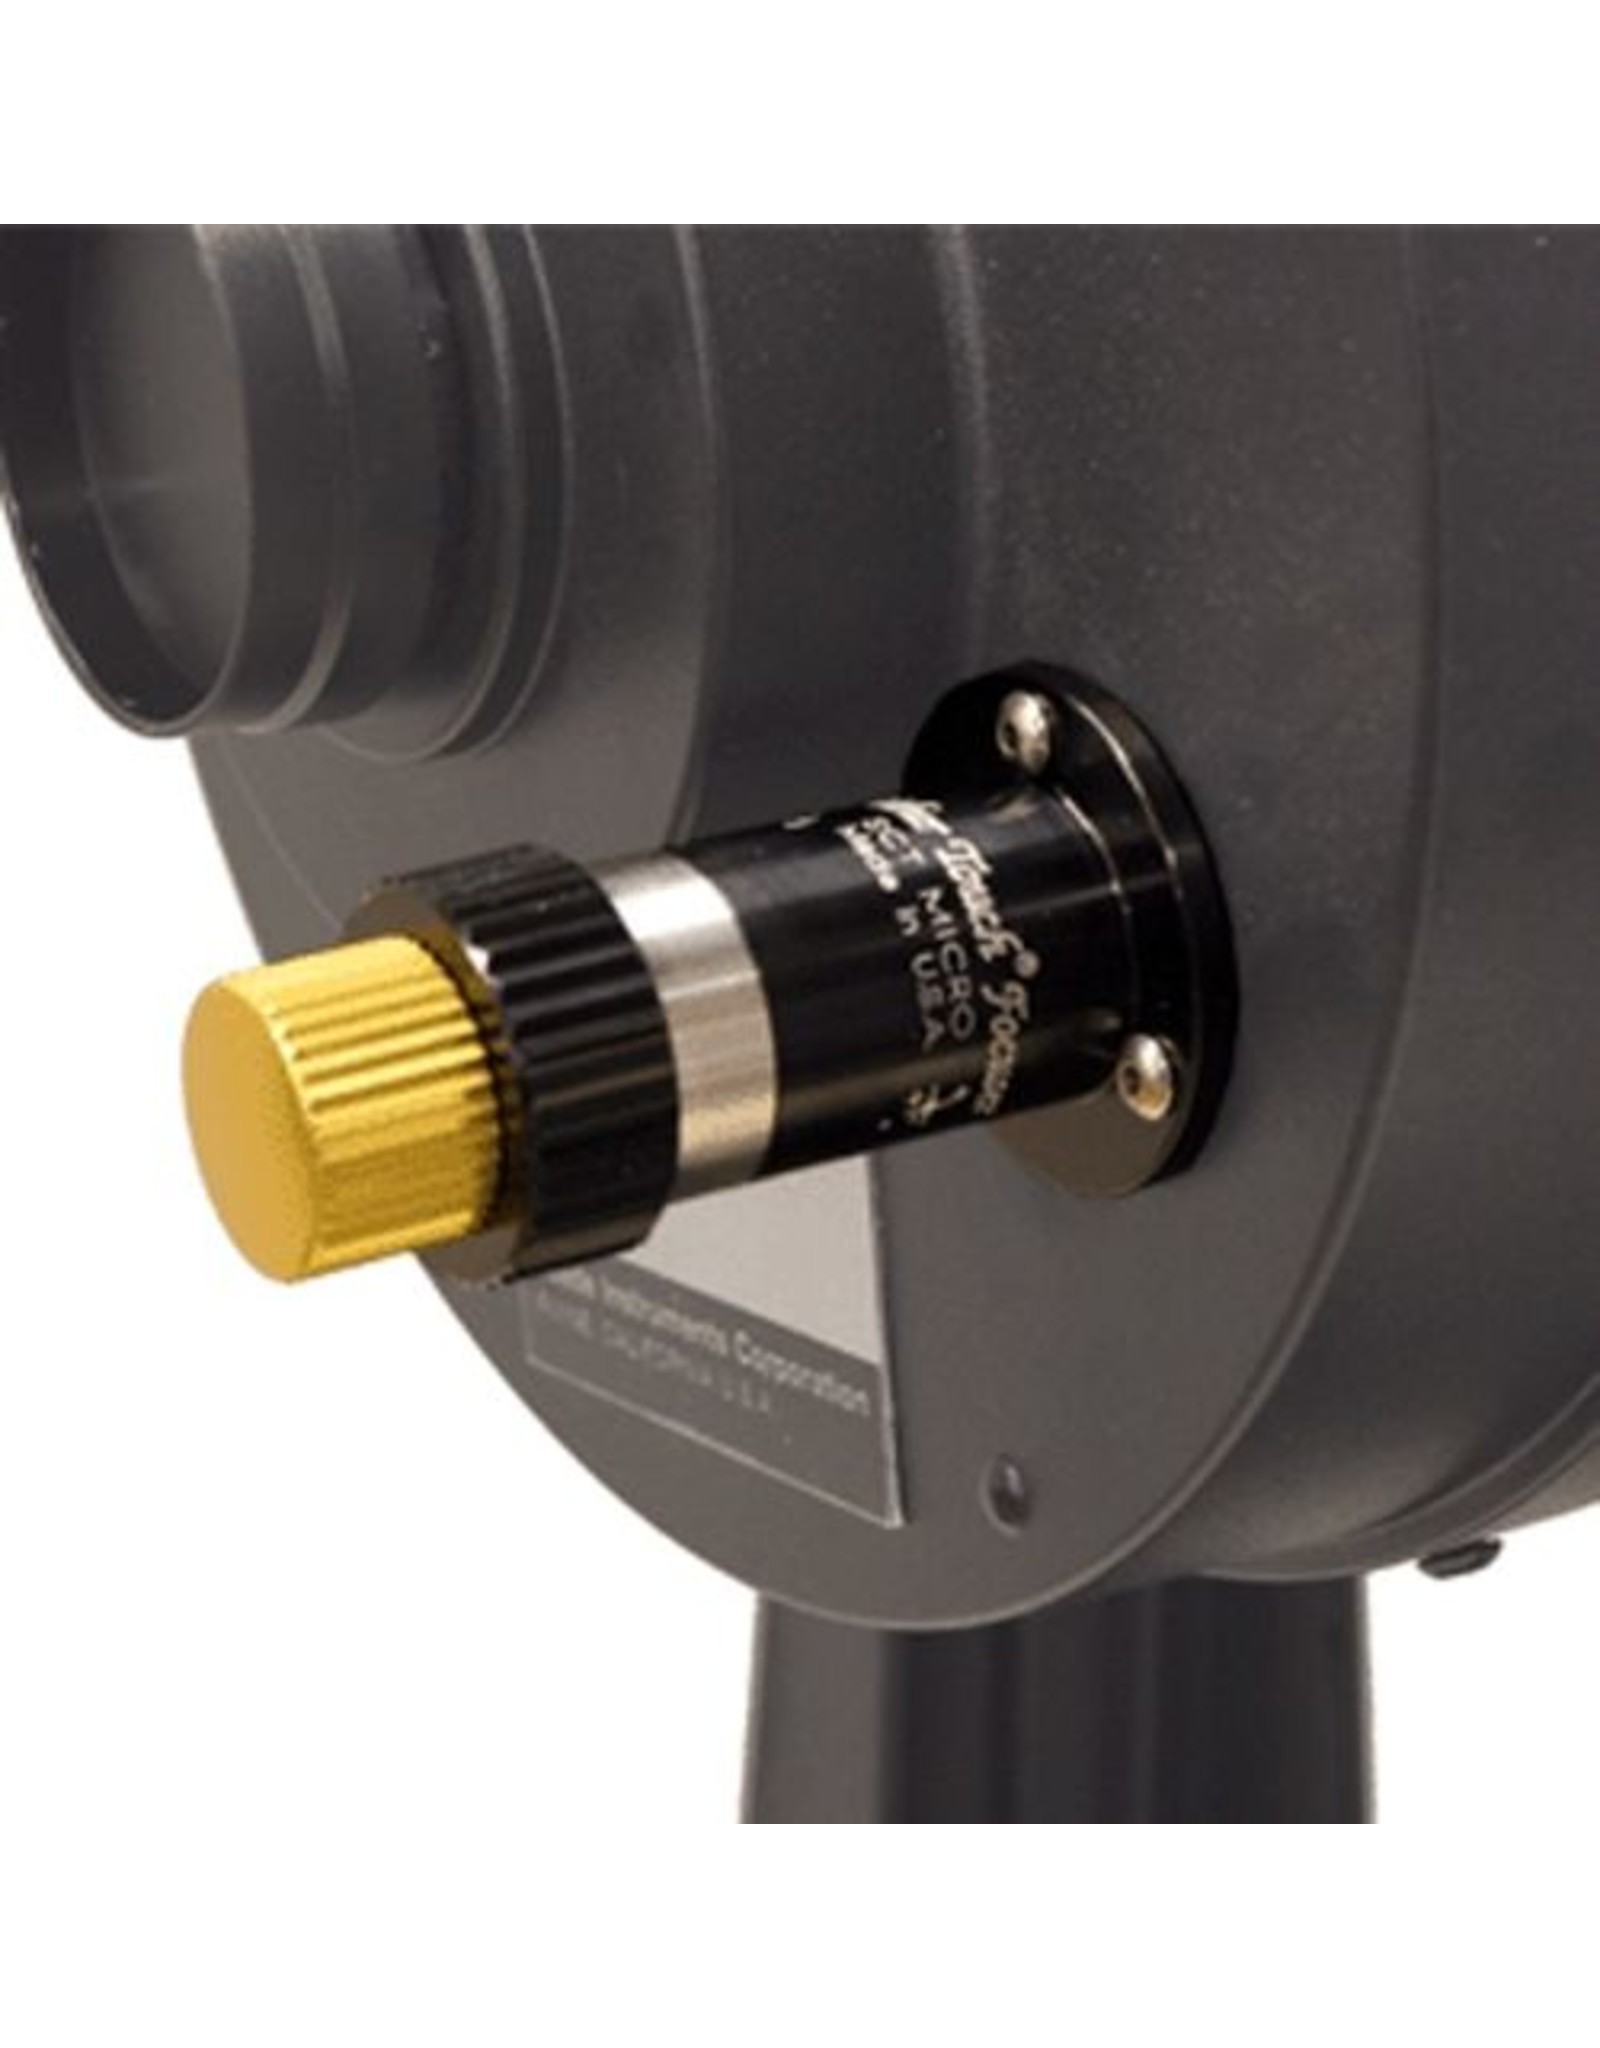 Feathertouch Feathertouch FTM-M1012--Micro for Meade 10" or 12" Schmidt-Cassegrain Telescopes